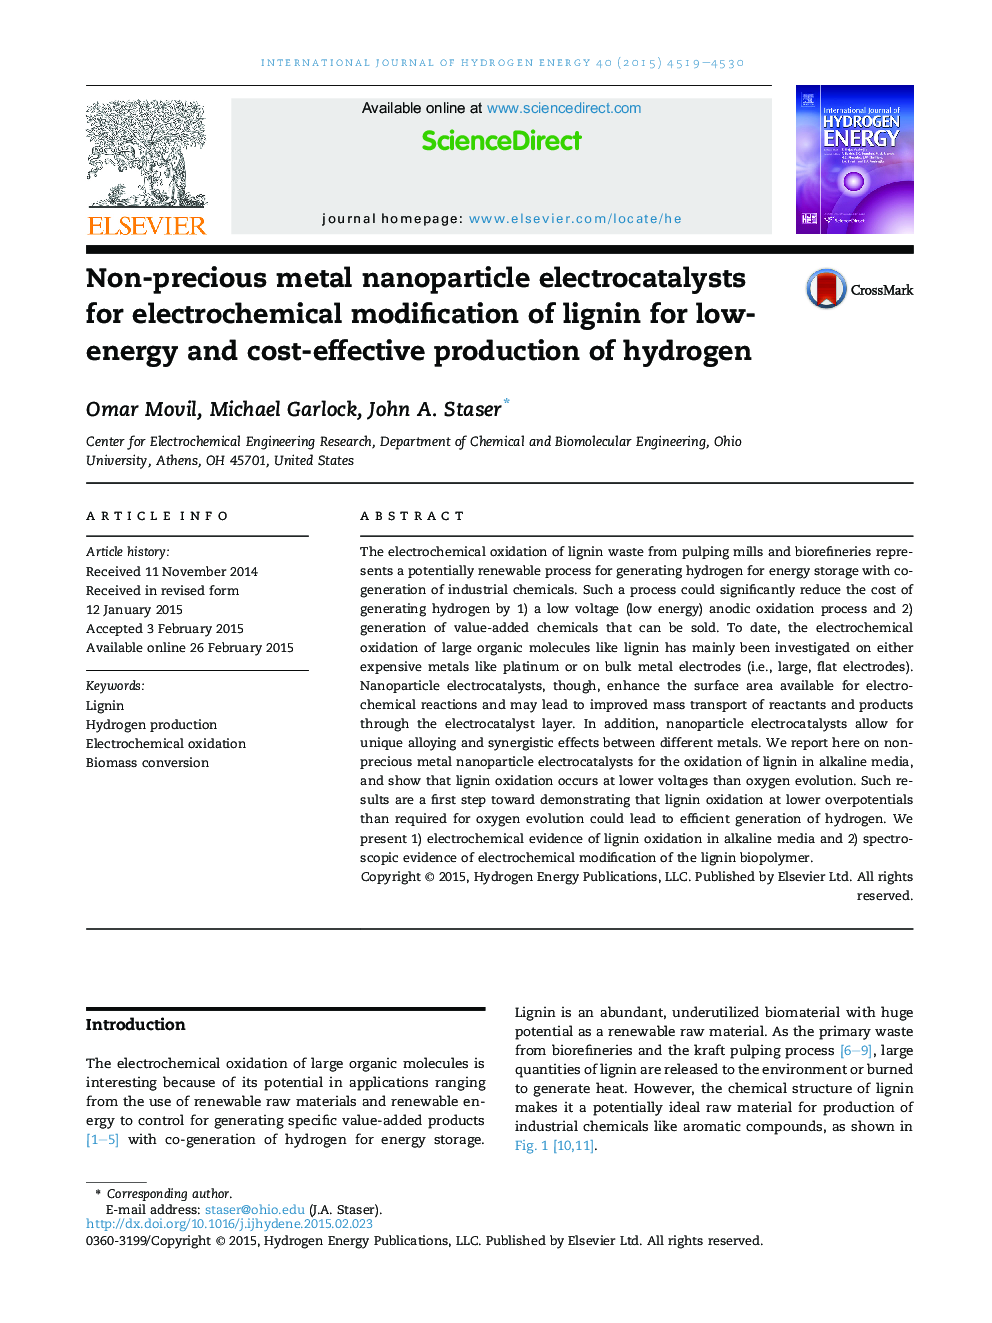 Non-precious metal nanoparticle electrocatalysts for electrochemical modification of lignin for low-energy and cost-effective production of hydrogen